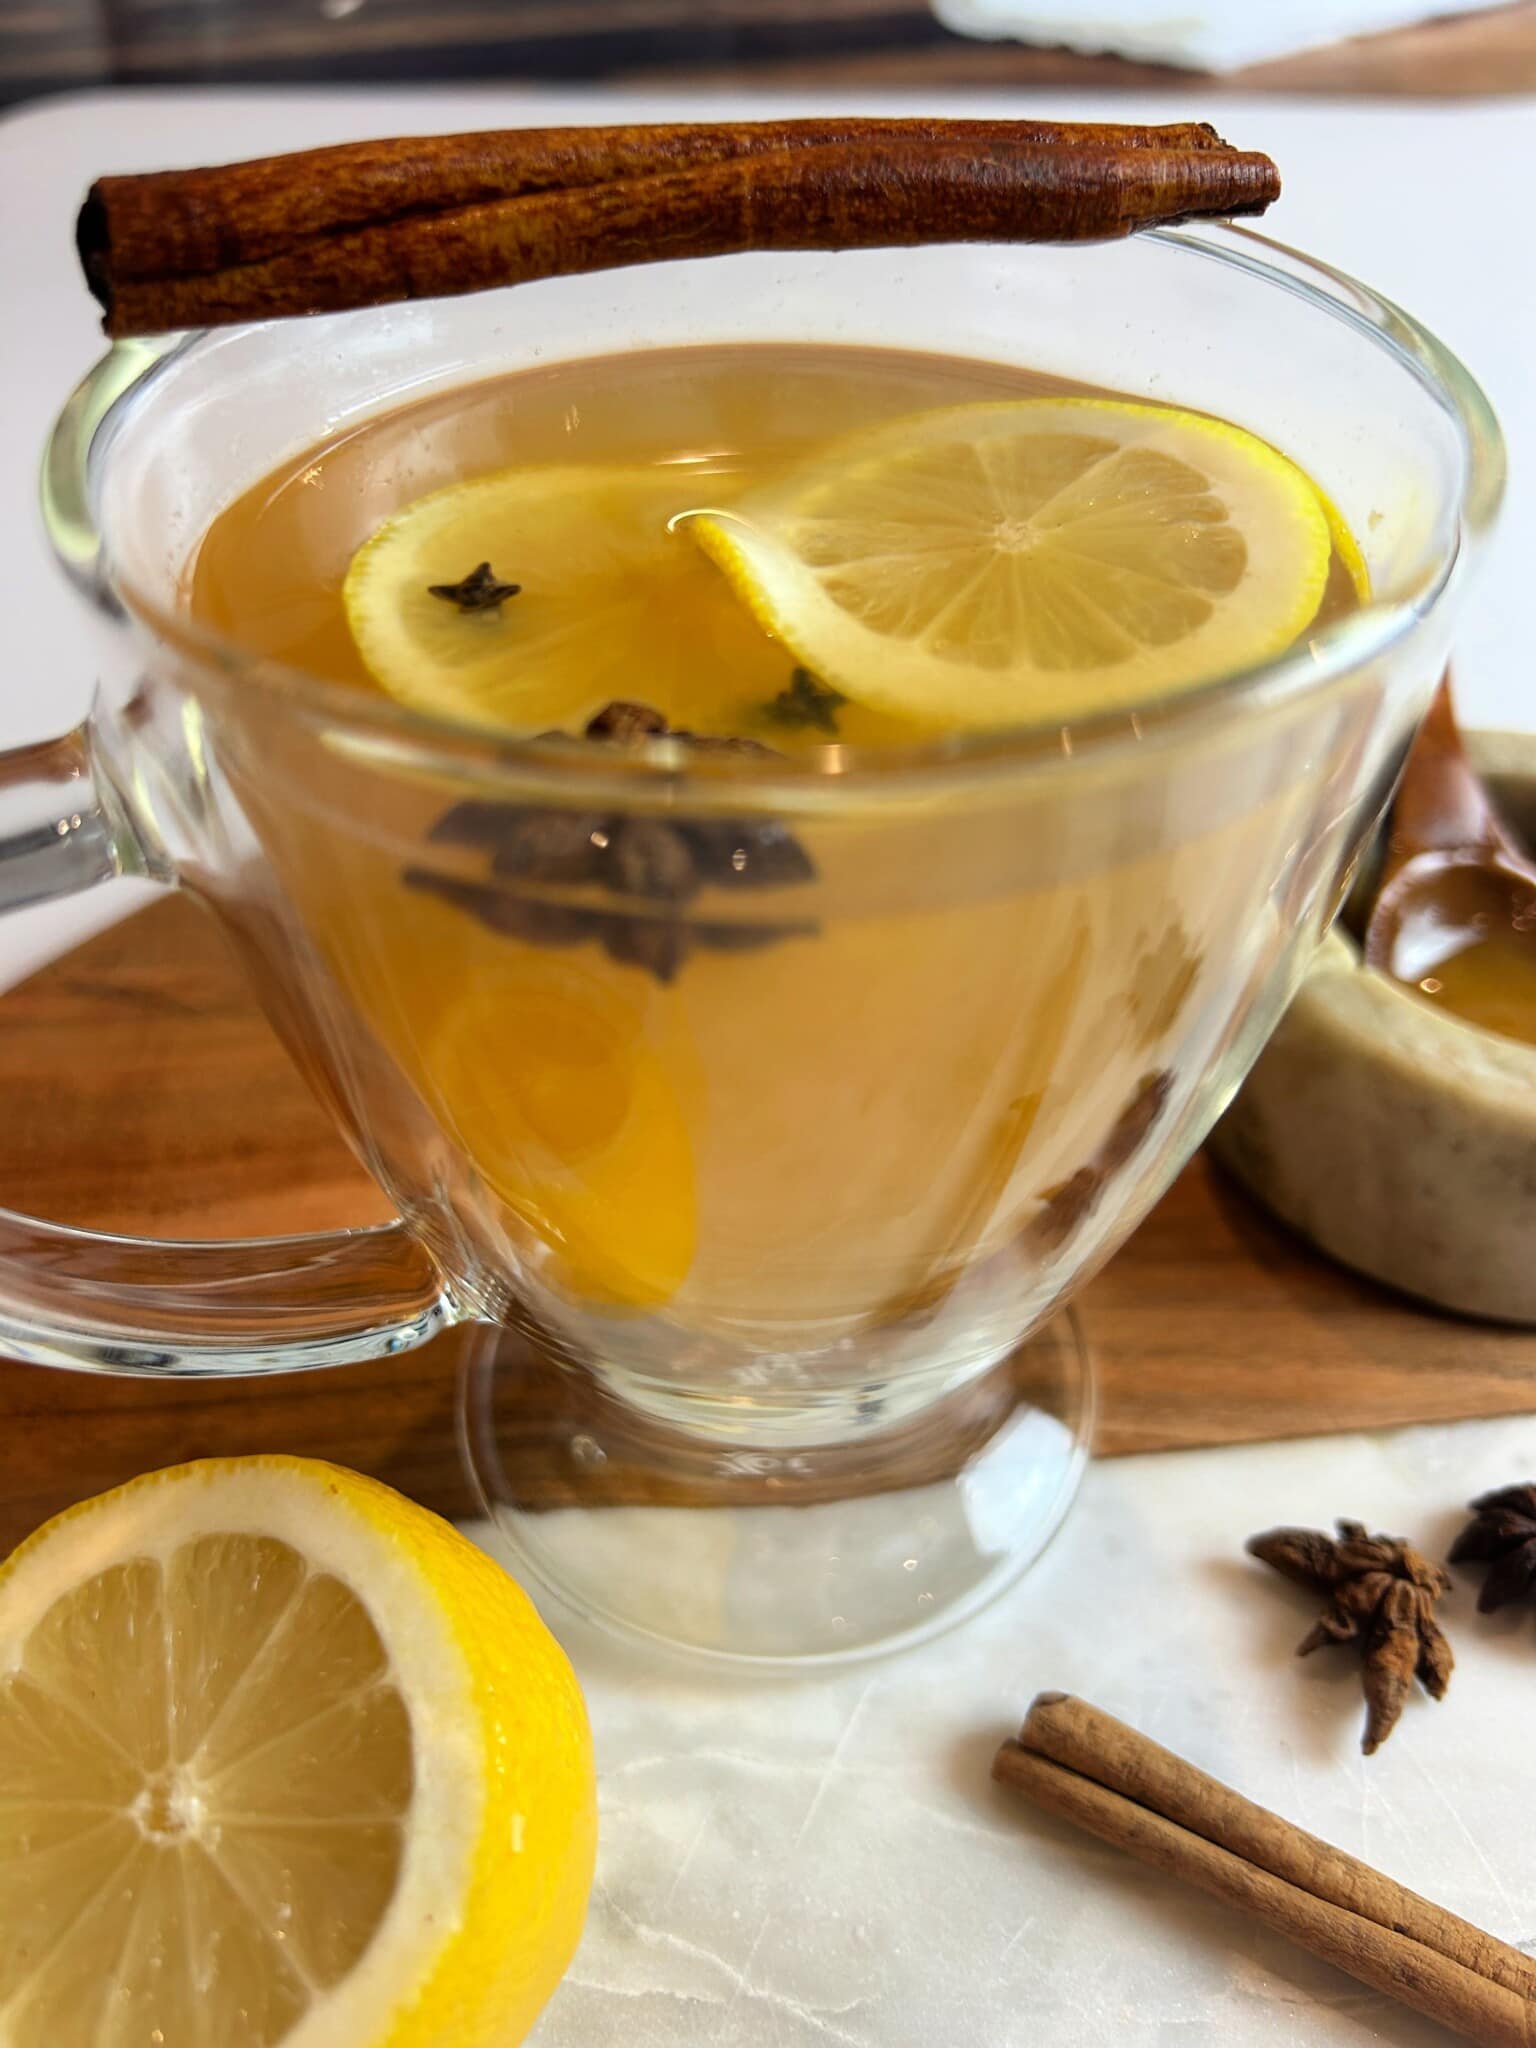 Hot Toddy Tea Recipe For A Cold - Lauren's Latest